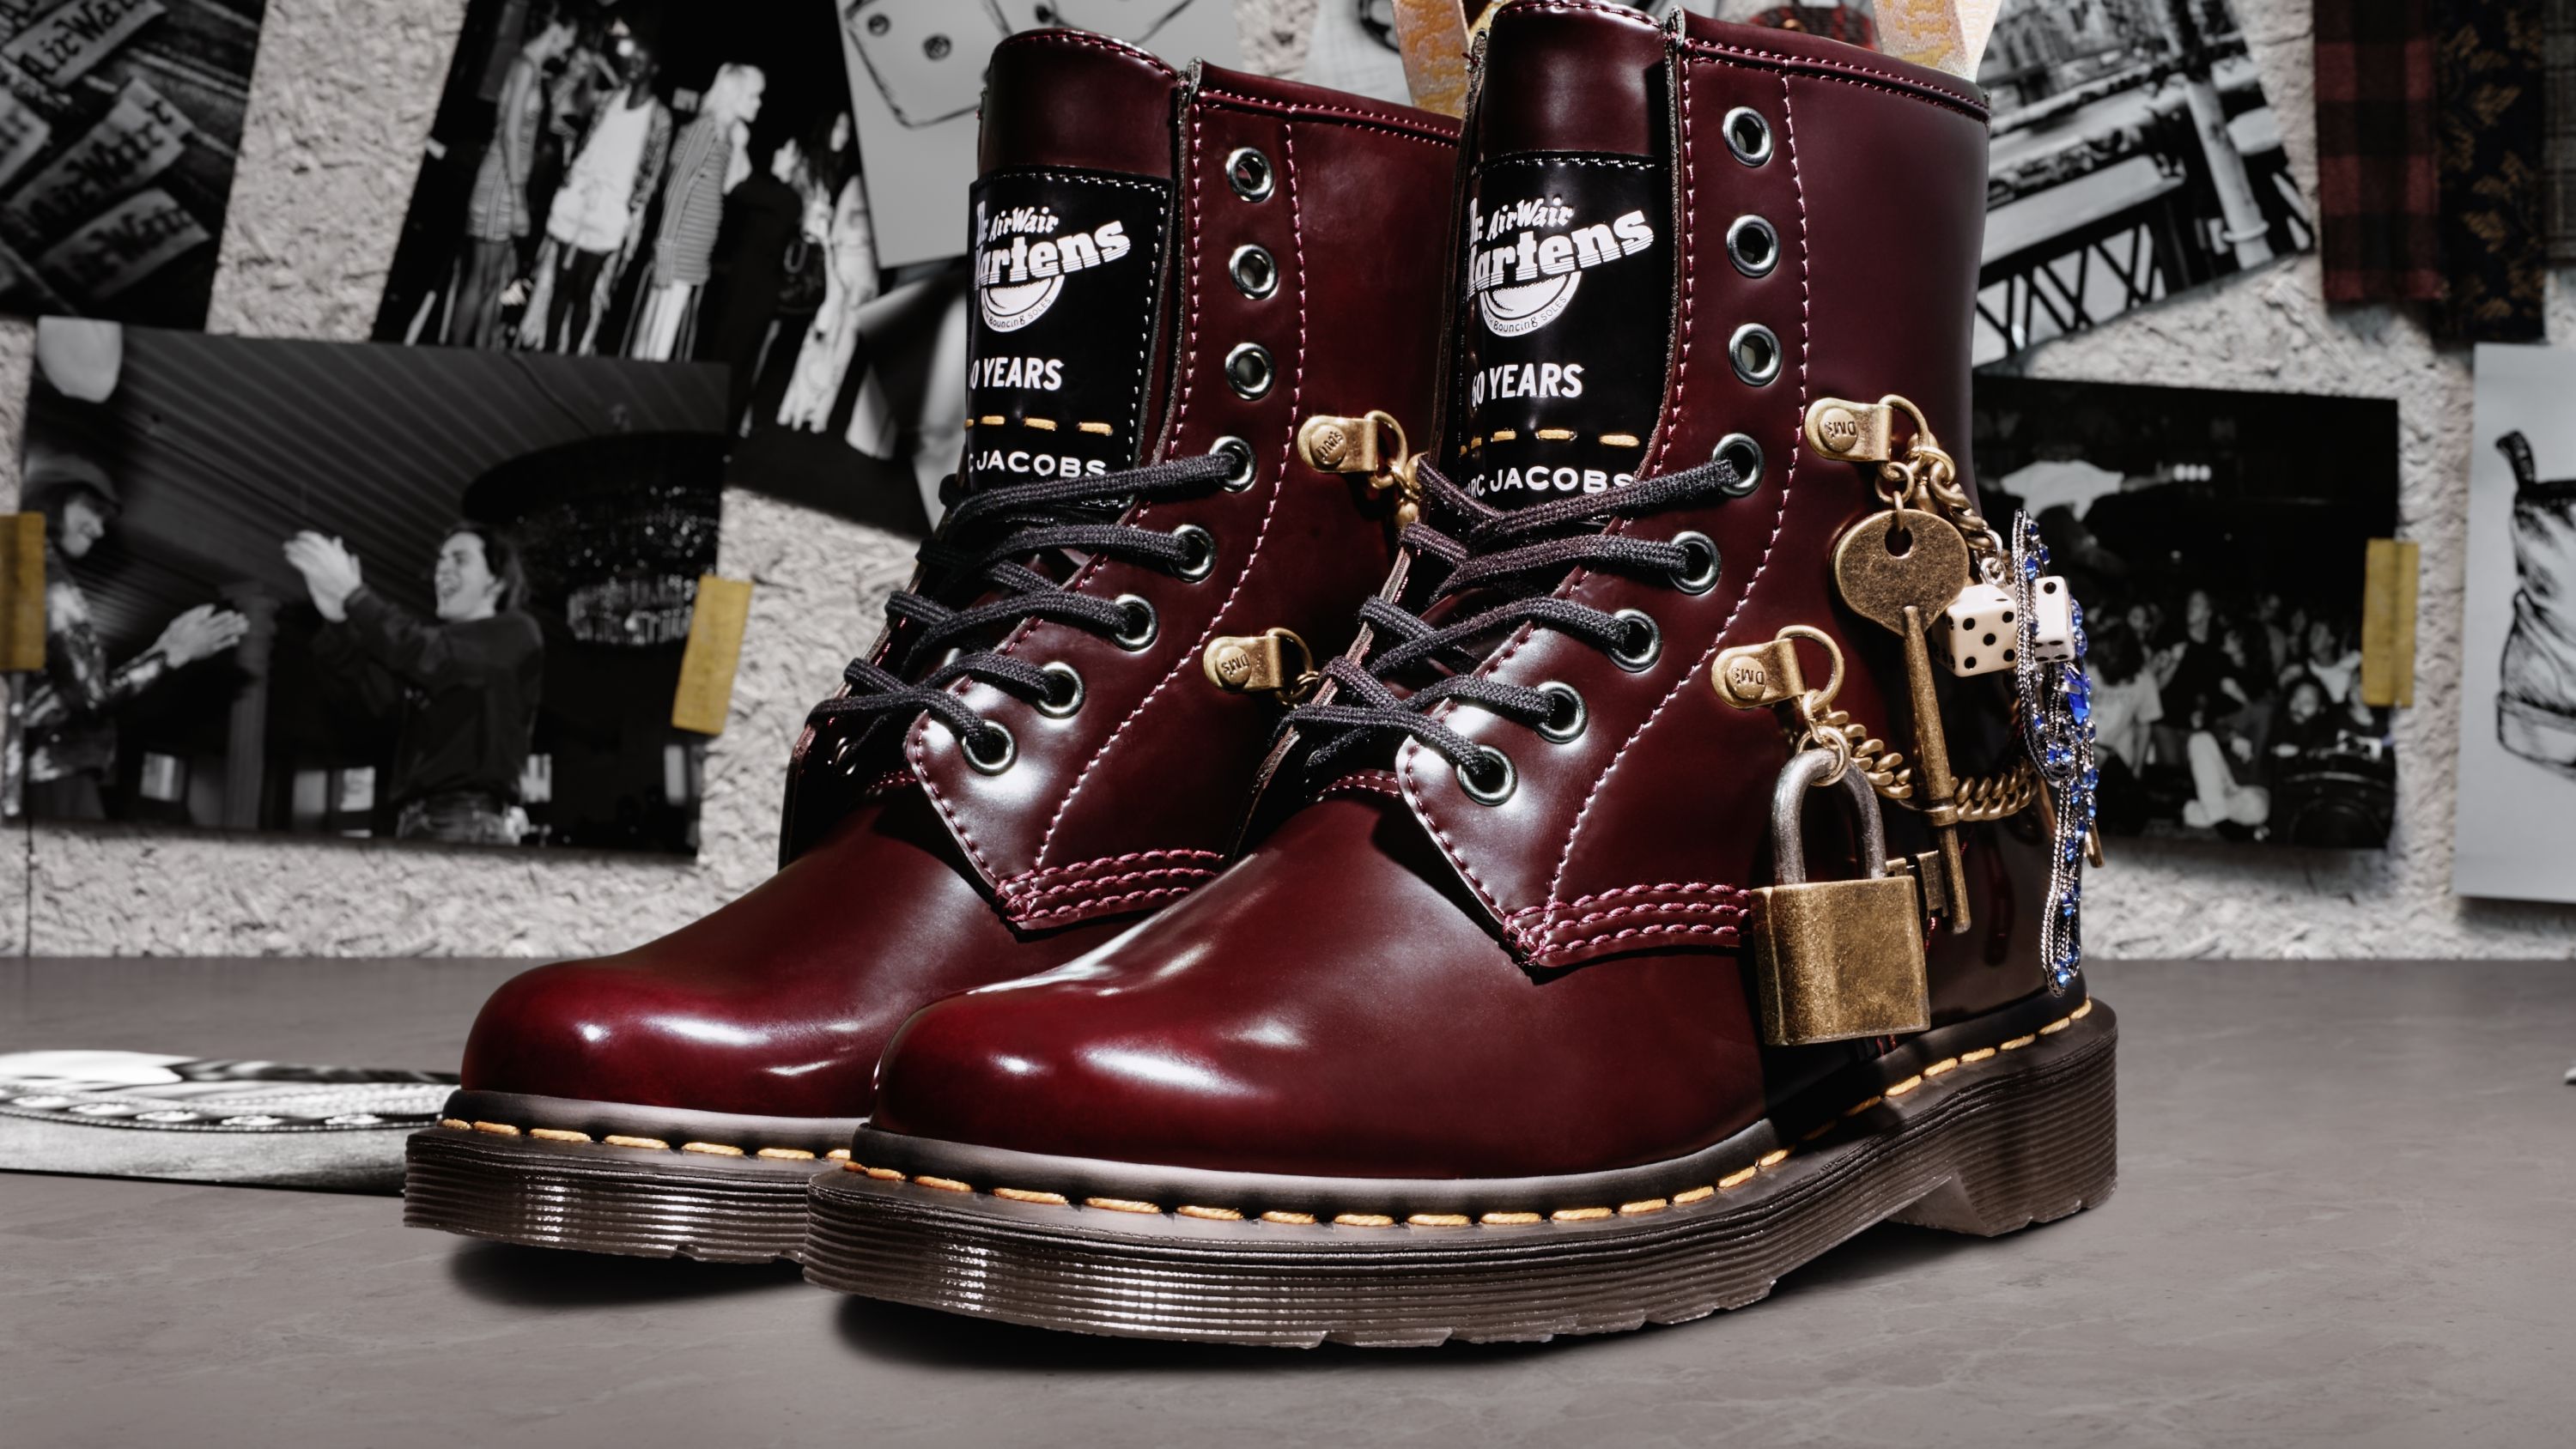 who dr martens